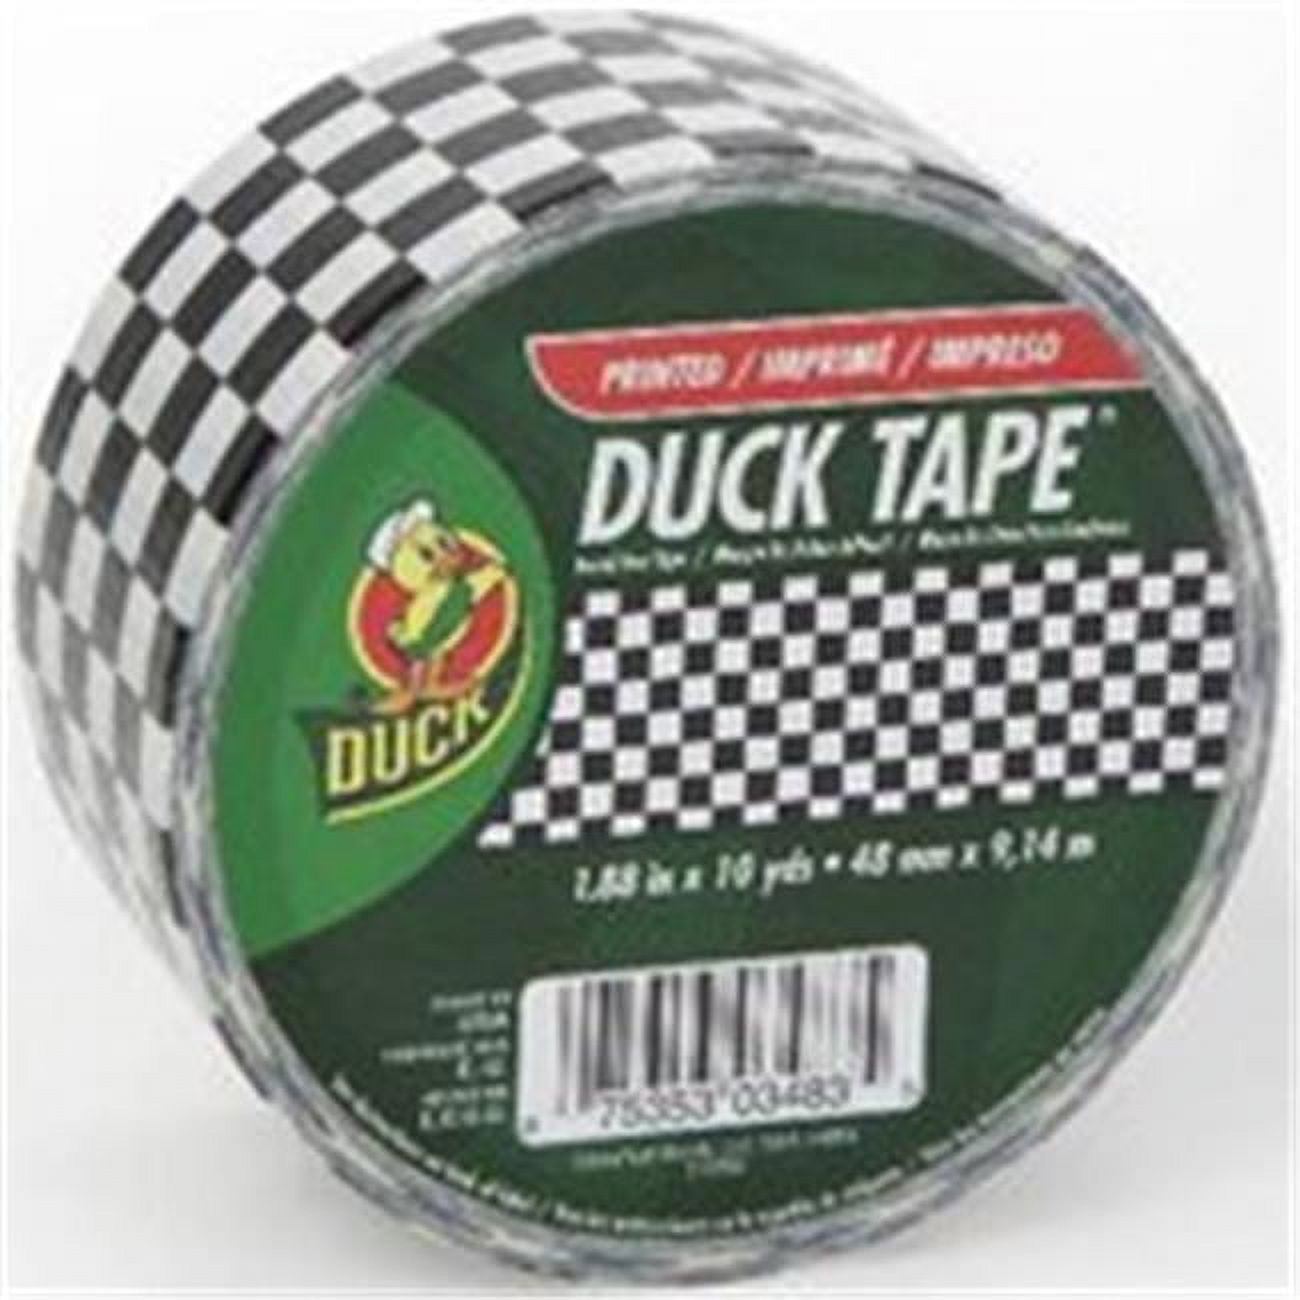 Duck Brand Duct Tape, 10 Yds, Black And - image 1 of 4